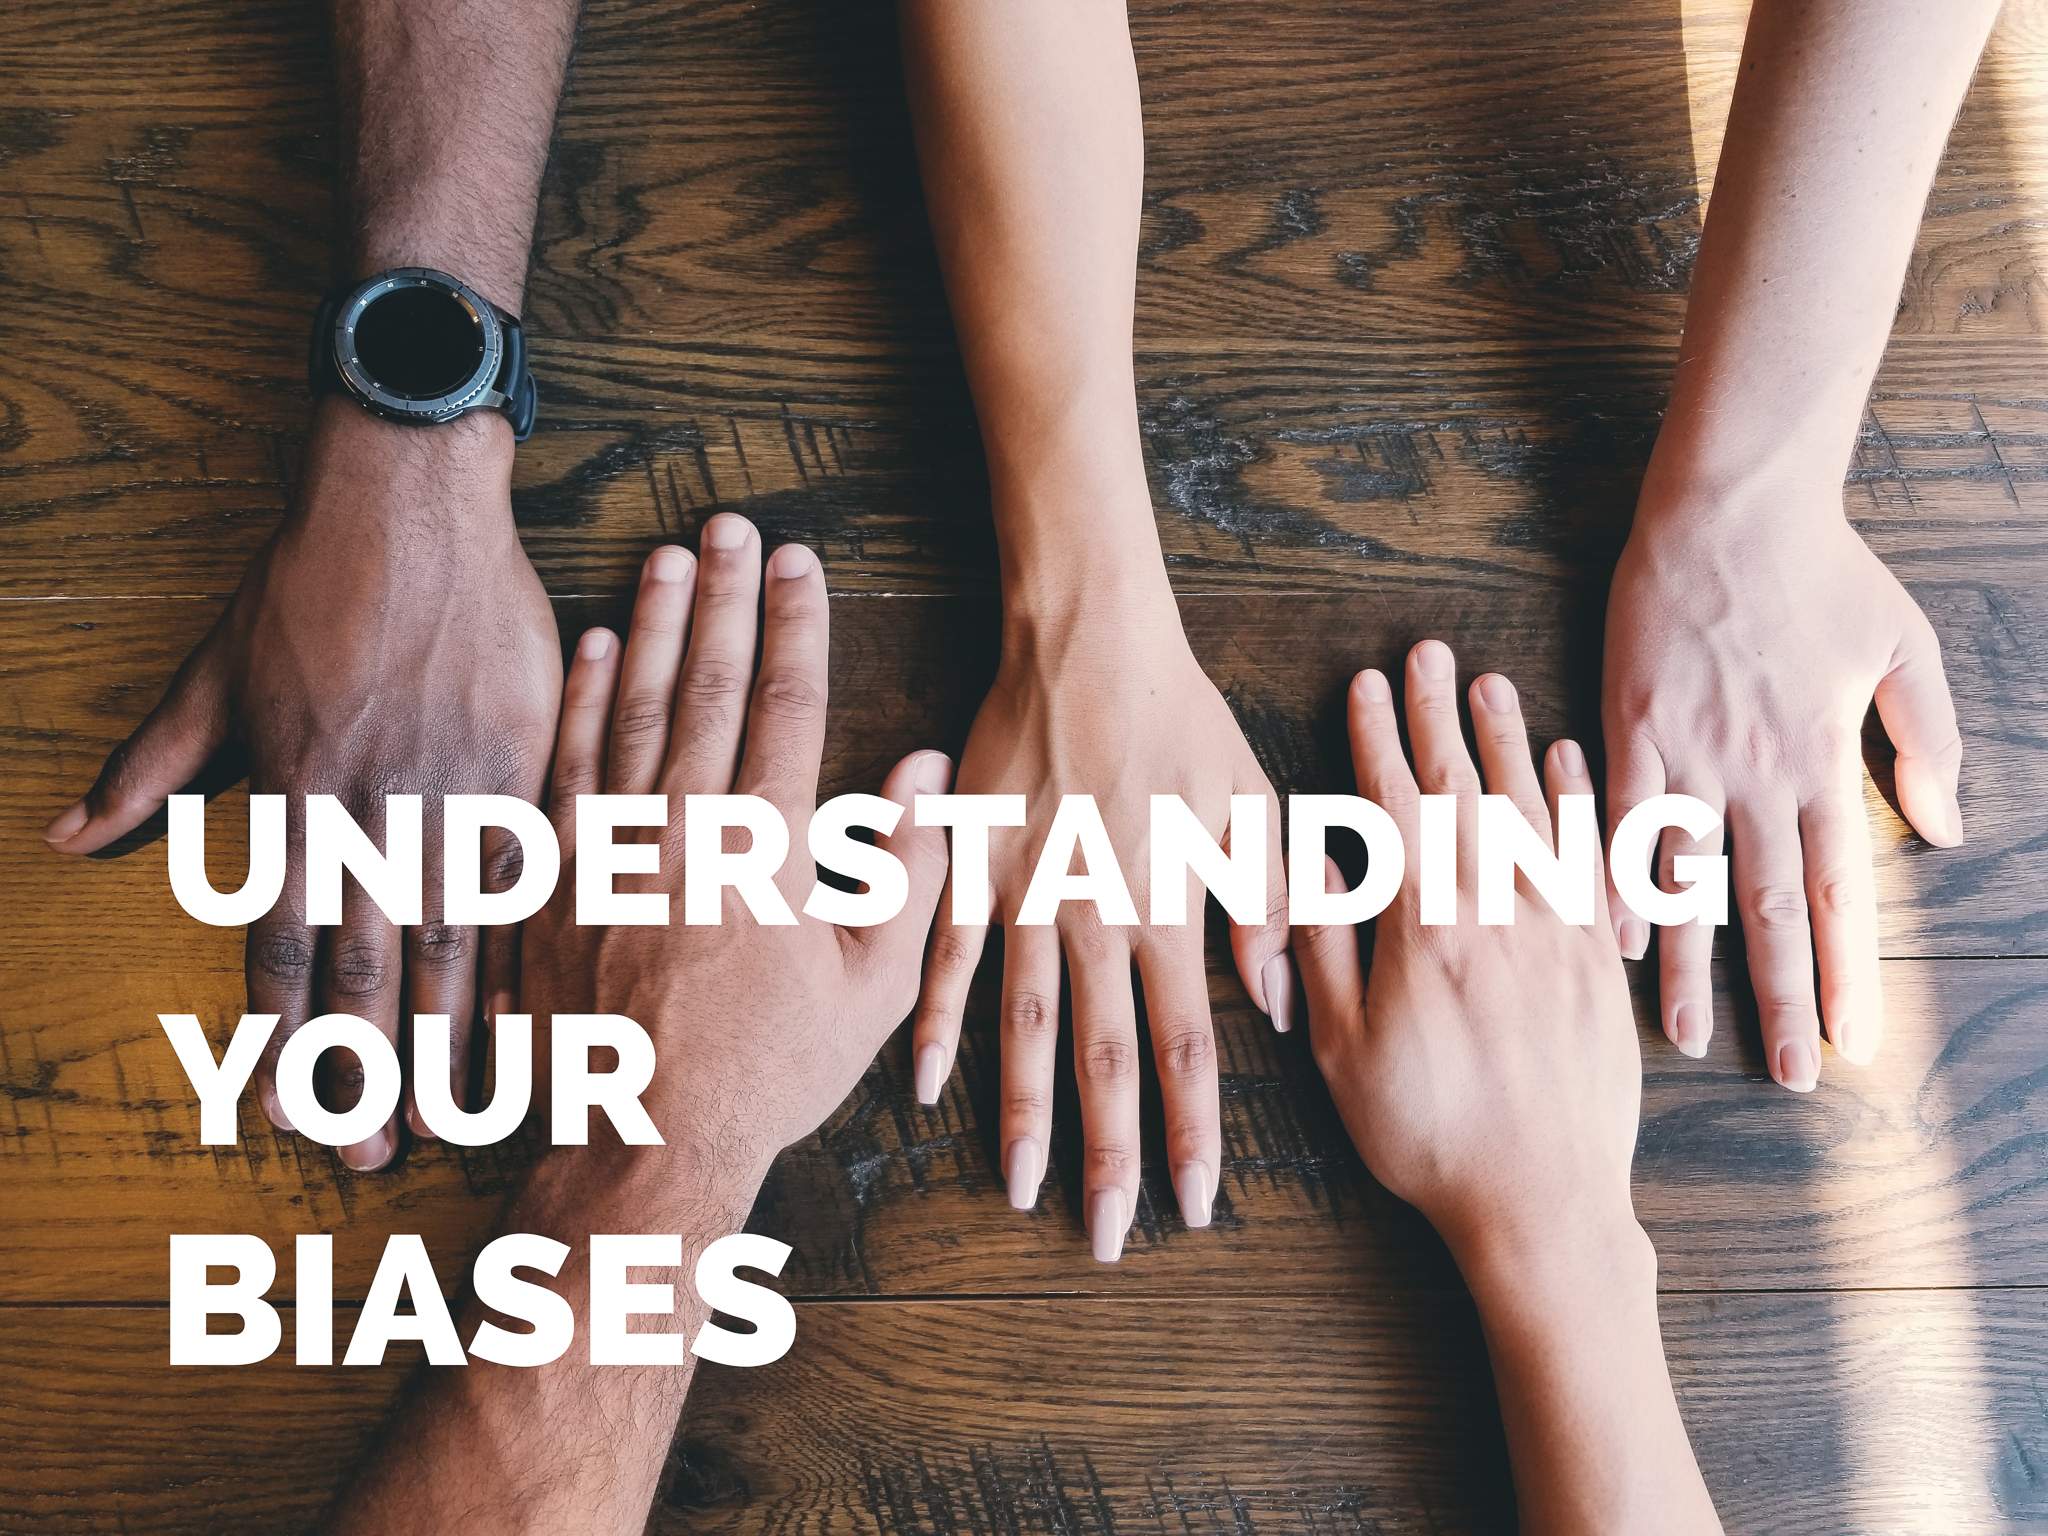 Showing Diversity When Discussing Biases